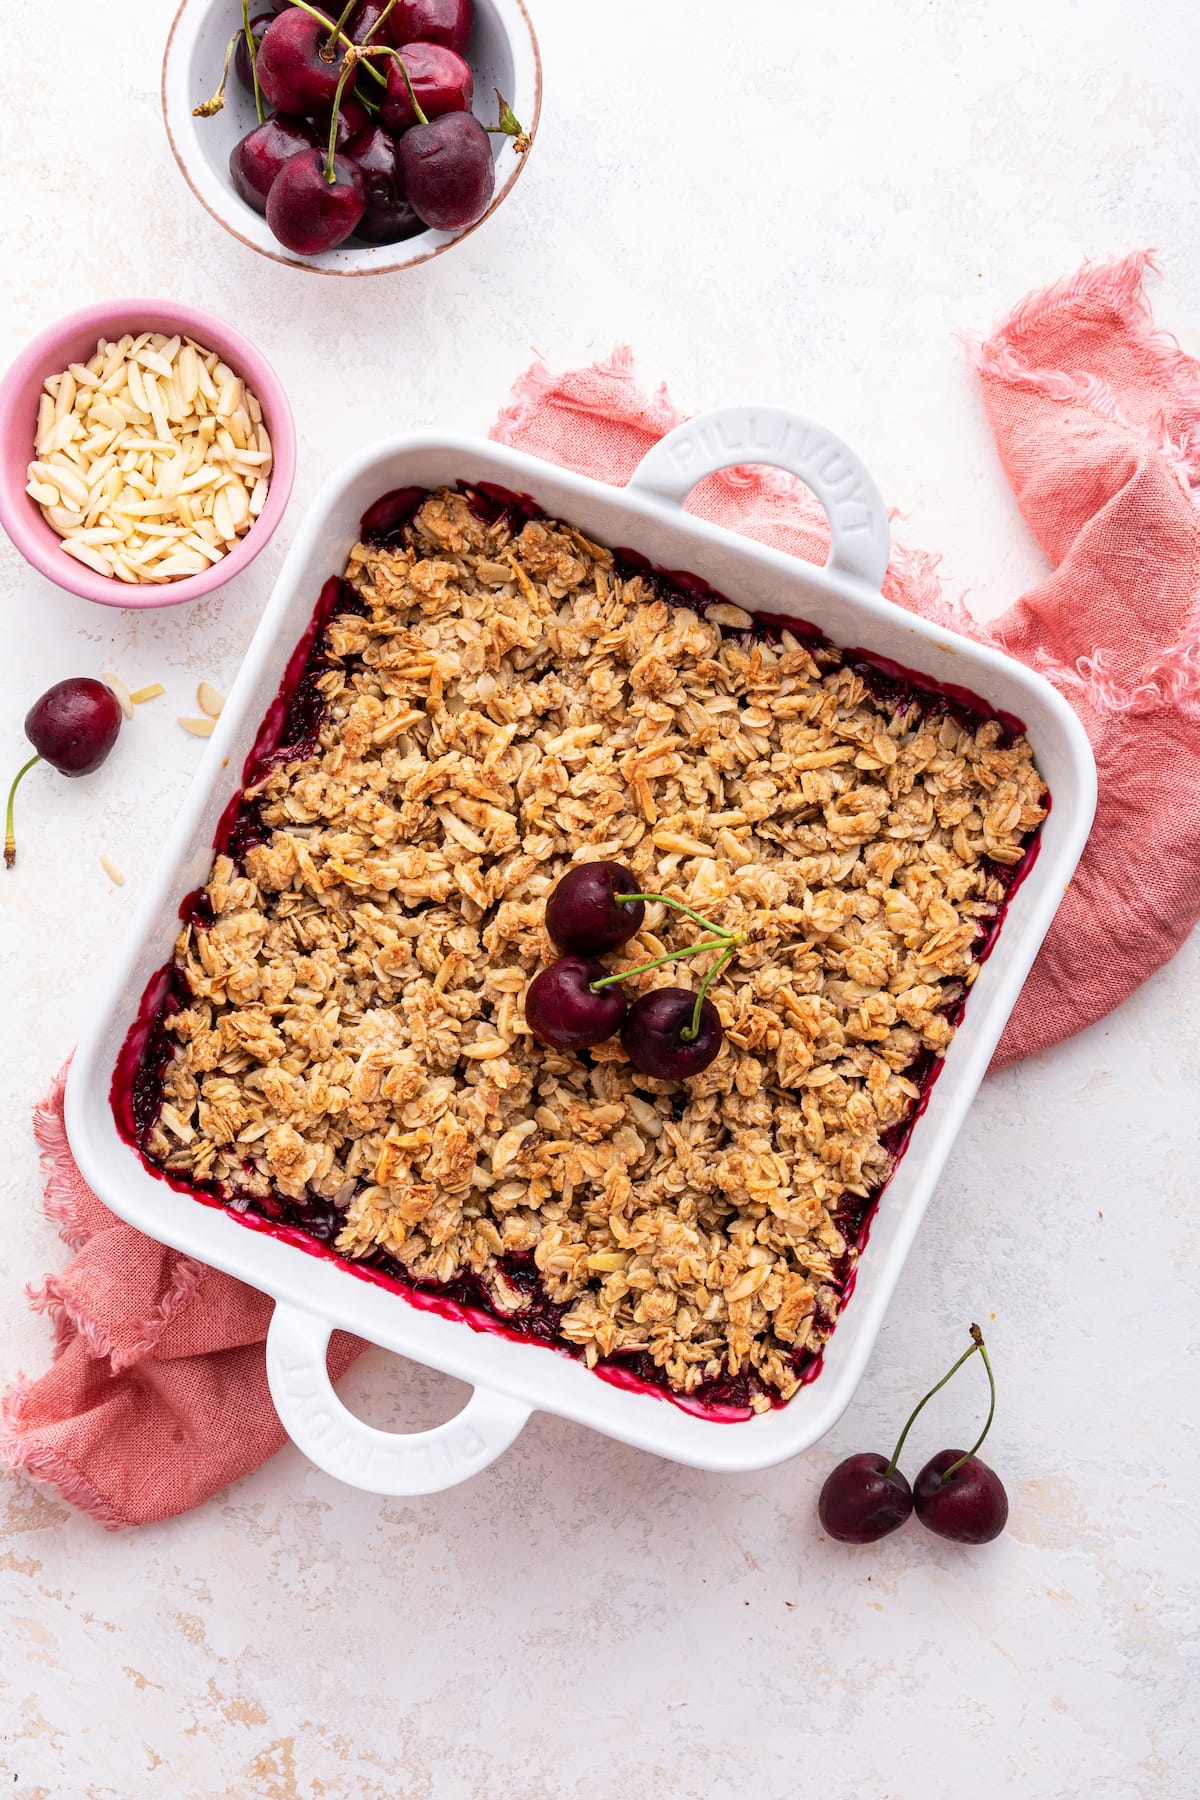 Cherry crisp in a square baking dish with three whole cherries in the center.